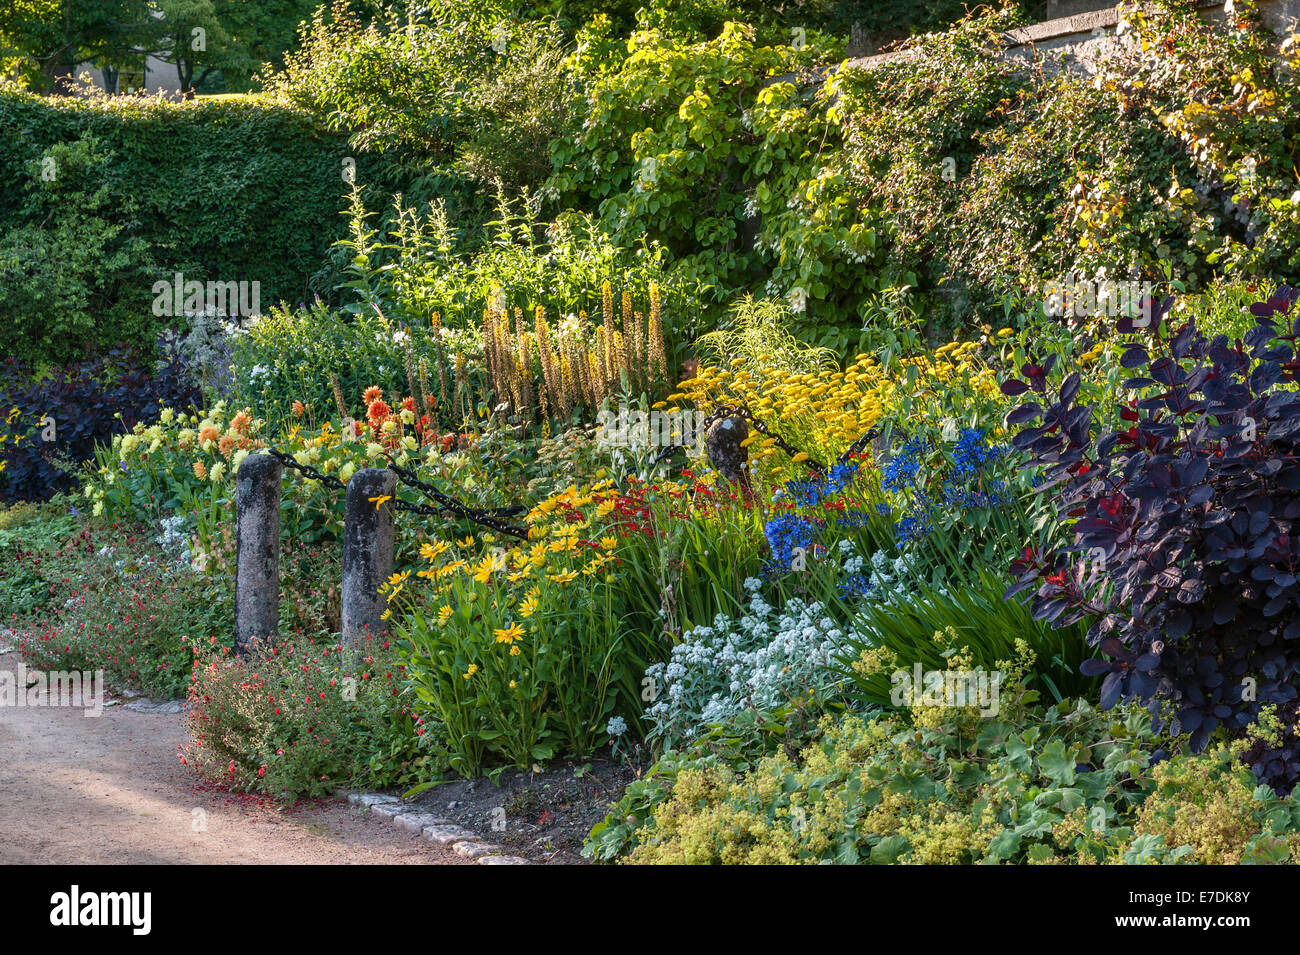 Crathes Castle, Banchory, Scotland, UK. Warm colours in the late summer border in the Upper Pool Garden Stock Photo